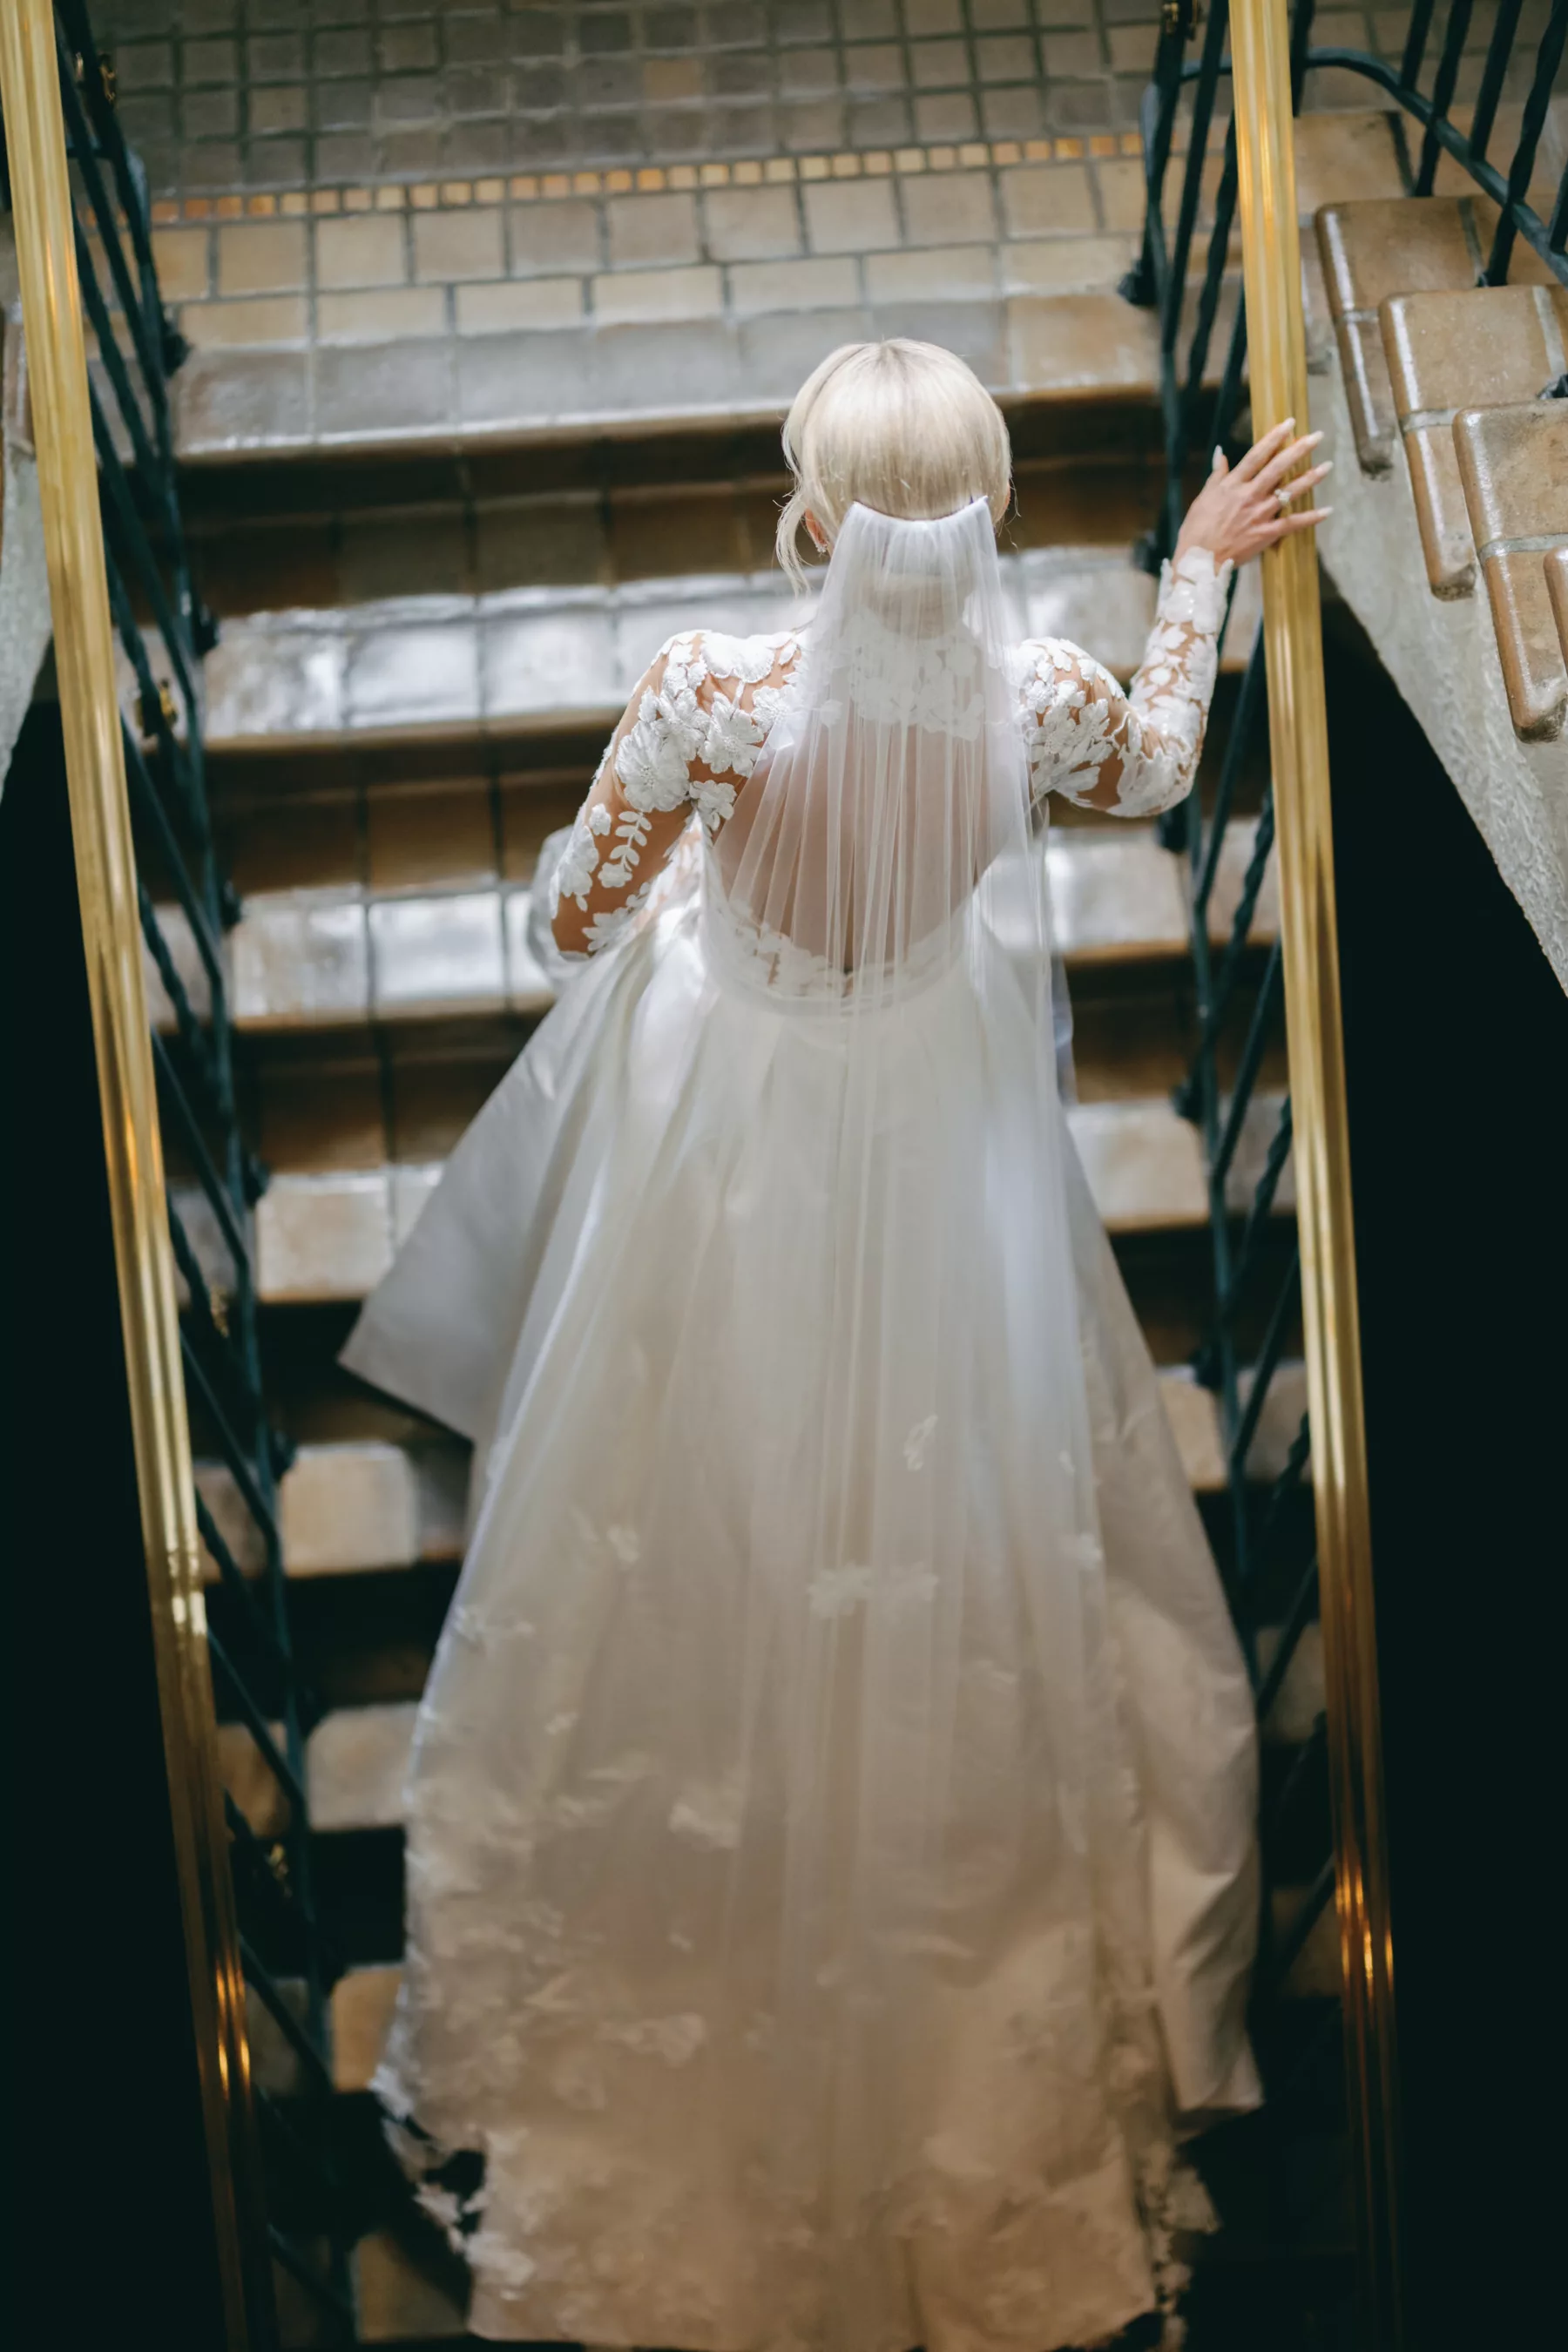 Bride Ascending Stairs Wedding Portrait | Cathedral Length Veil Ideas